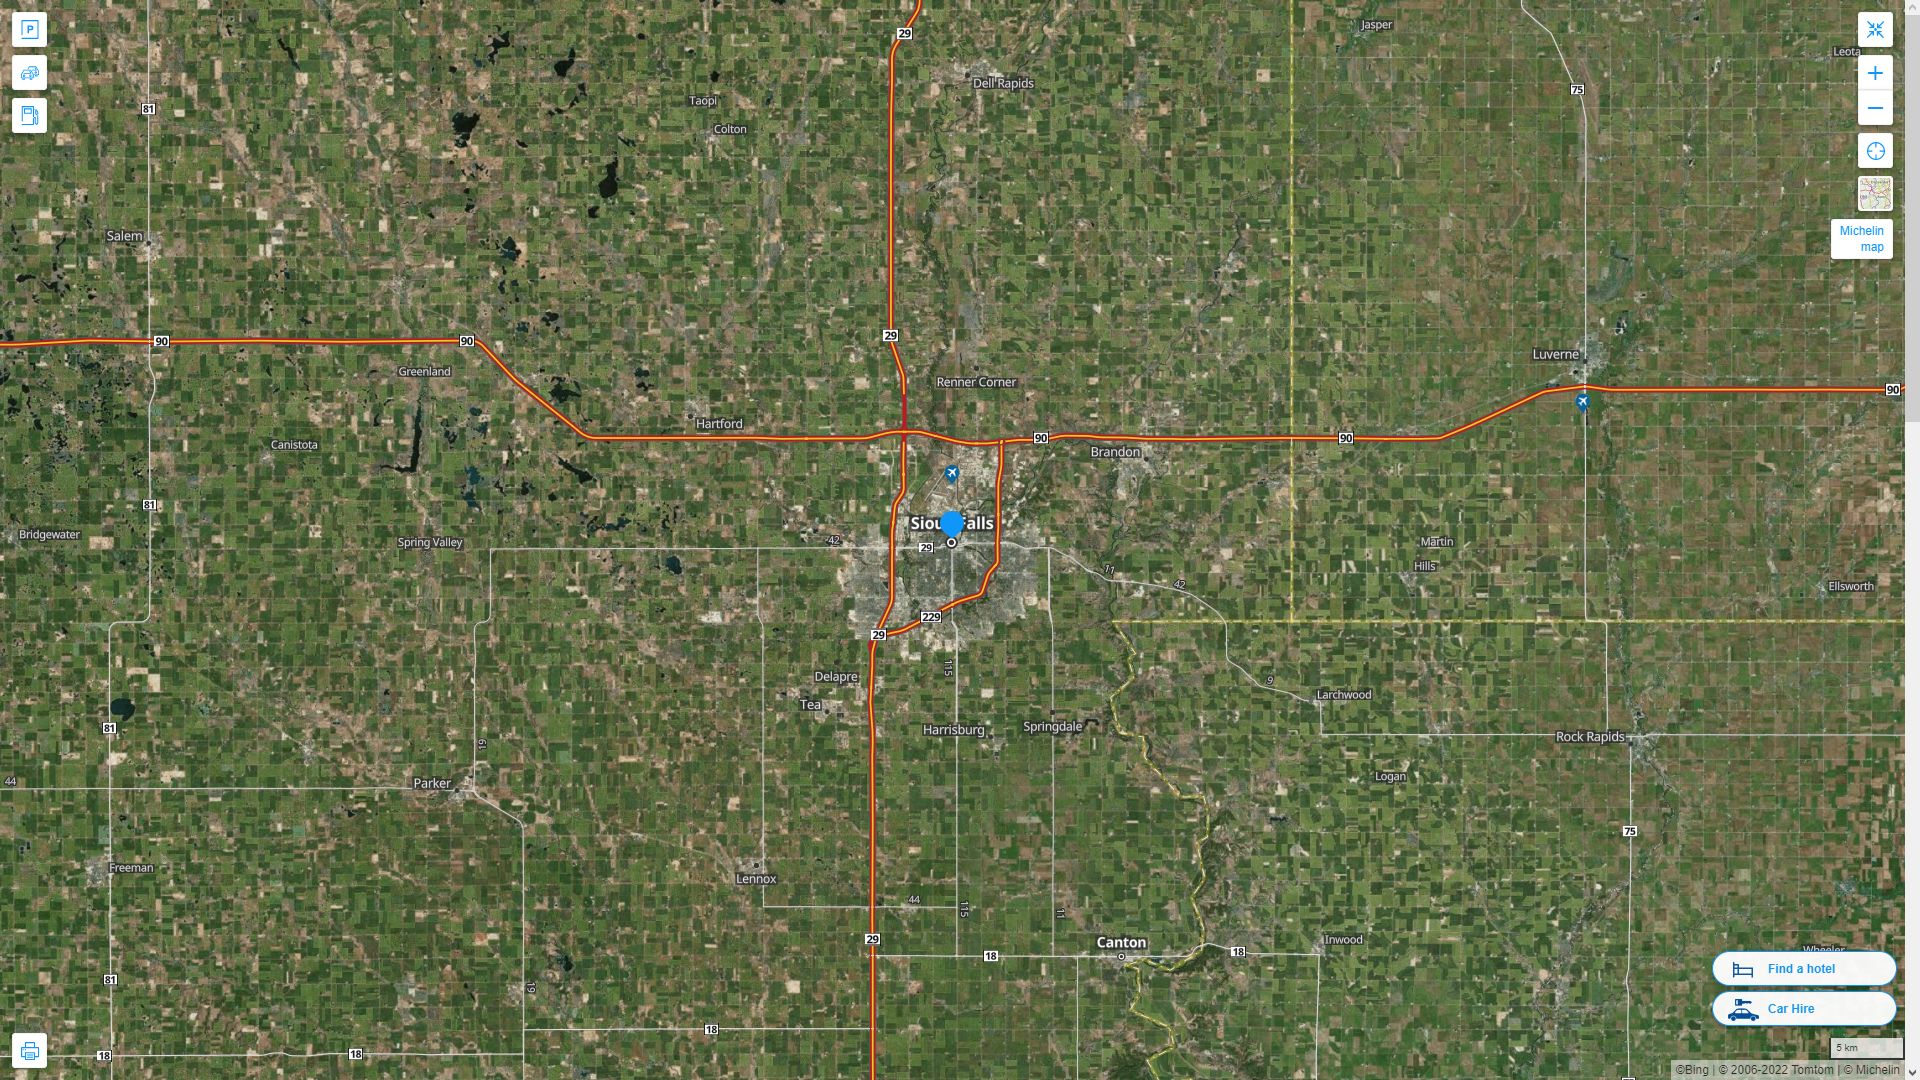 Sioux Falls South Dakota Highway and Road Map with Satellite View